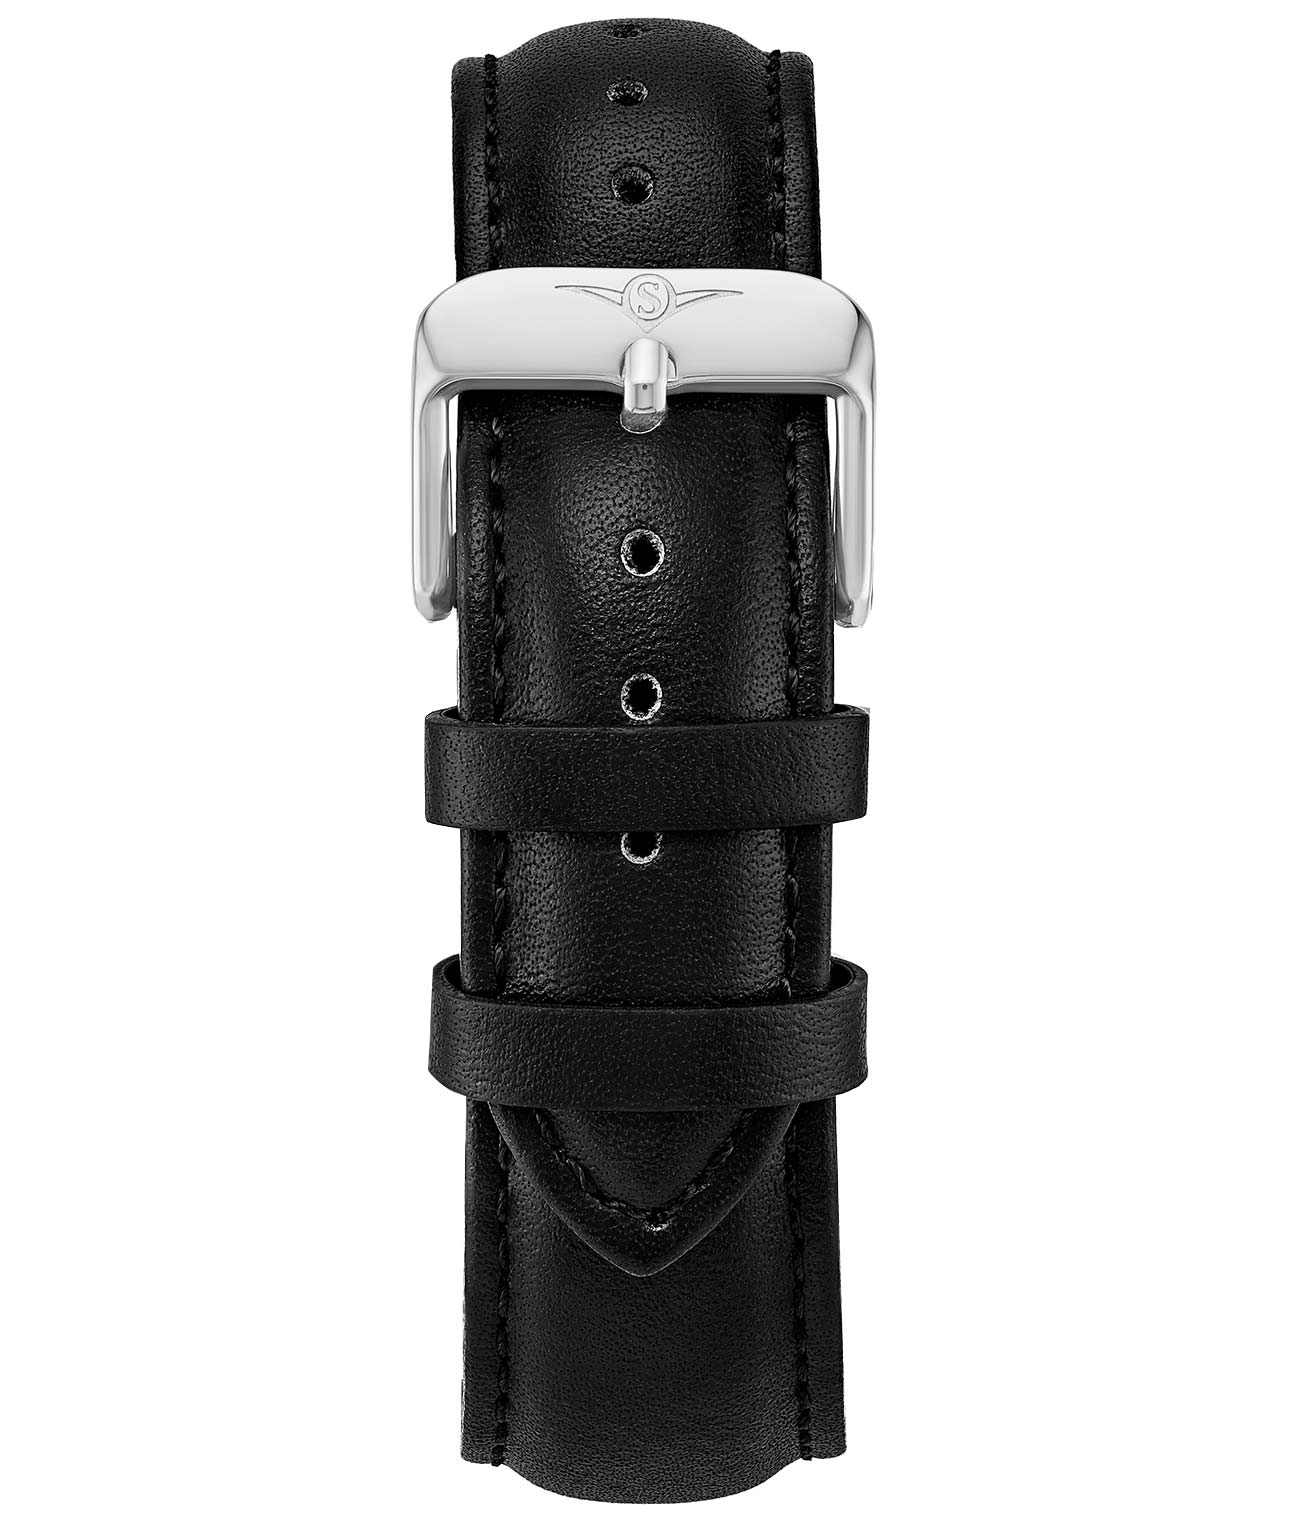 Replacement Strap st.133.33151 – Stührling